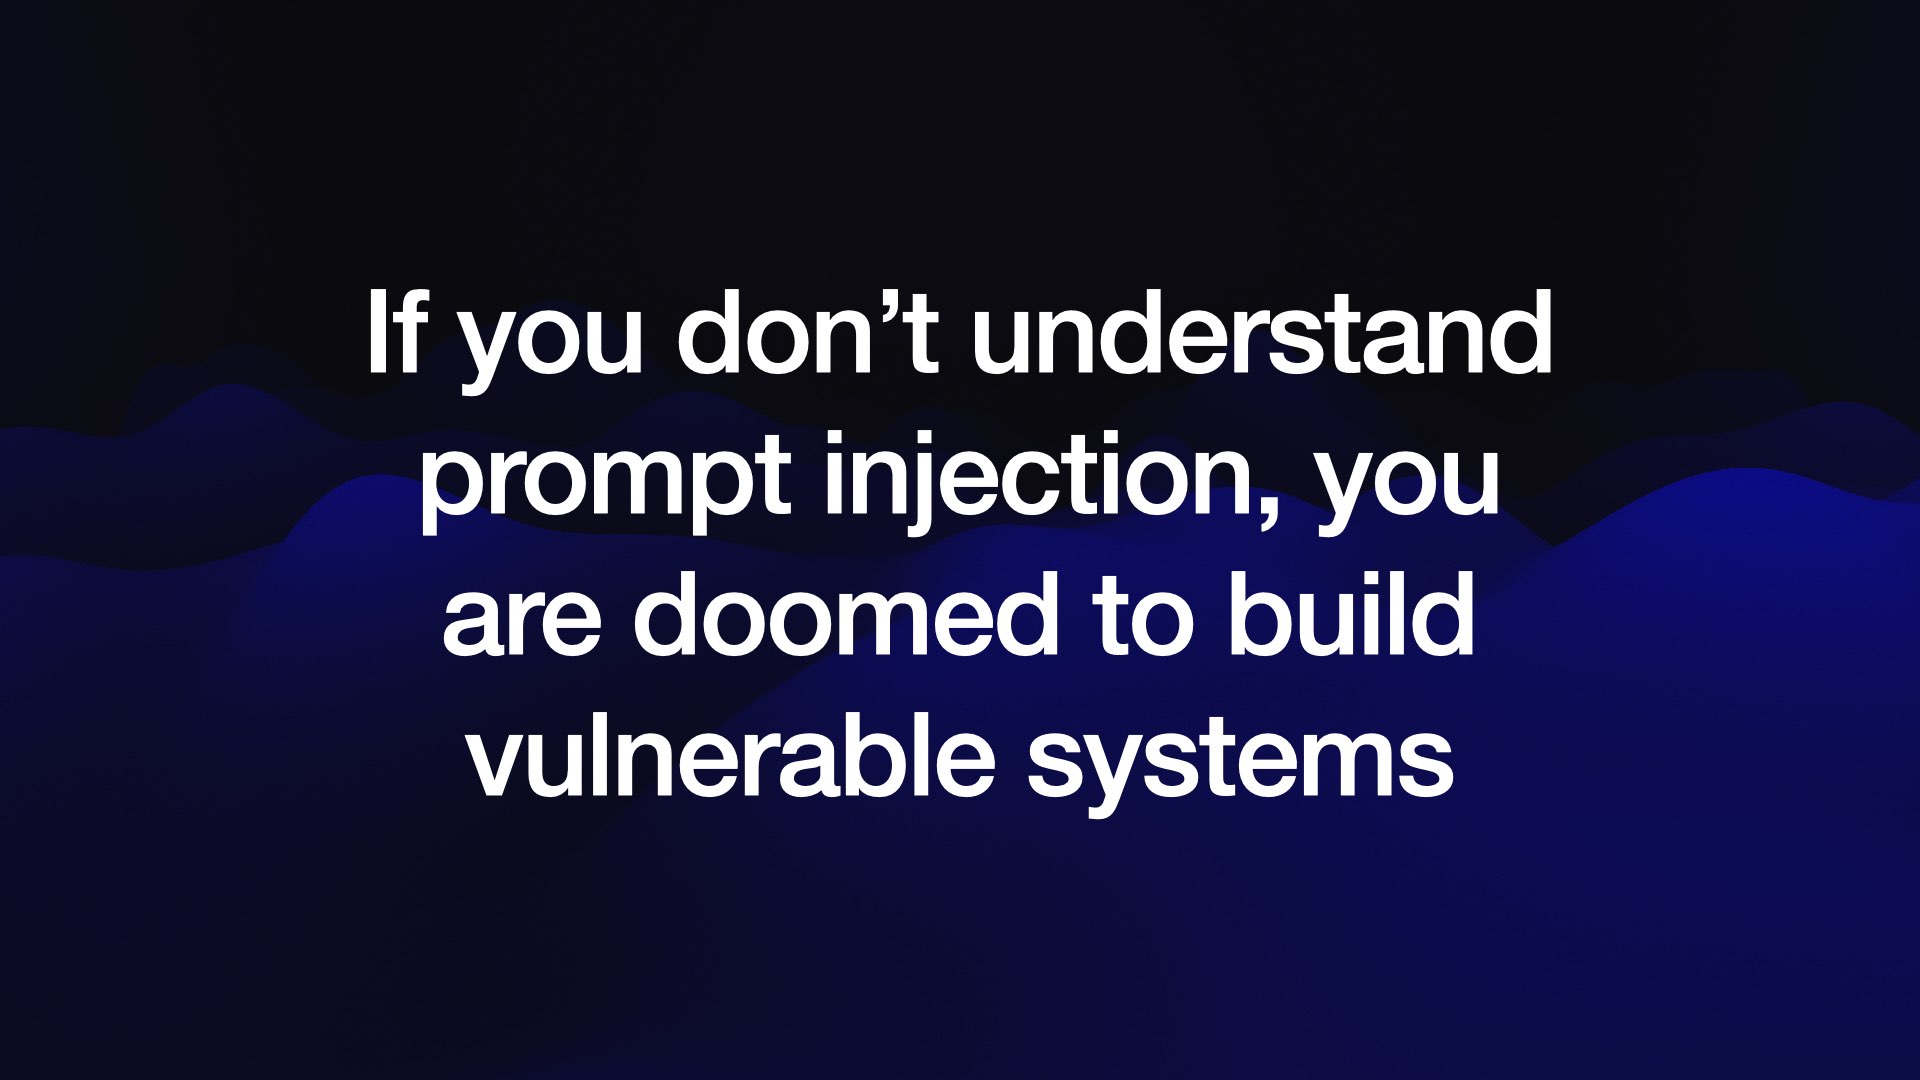 If you don’t understand prompt injection, you are doomed to build vulnerable systems